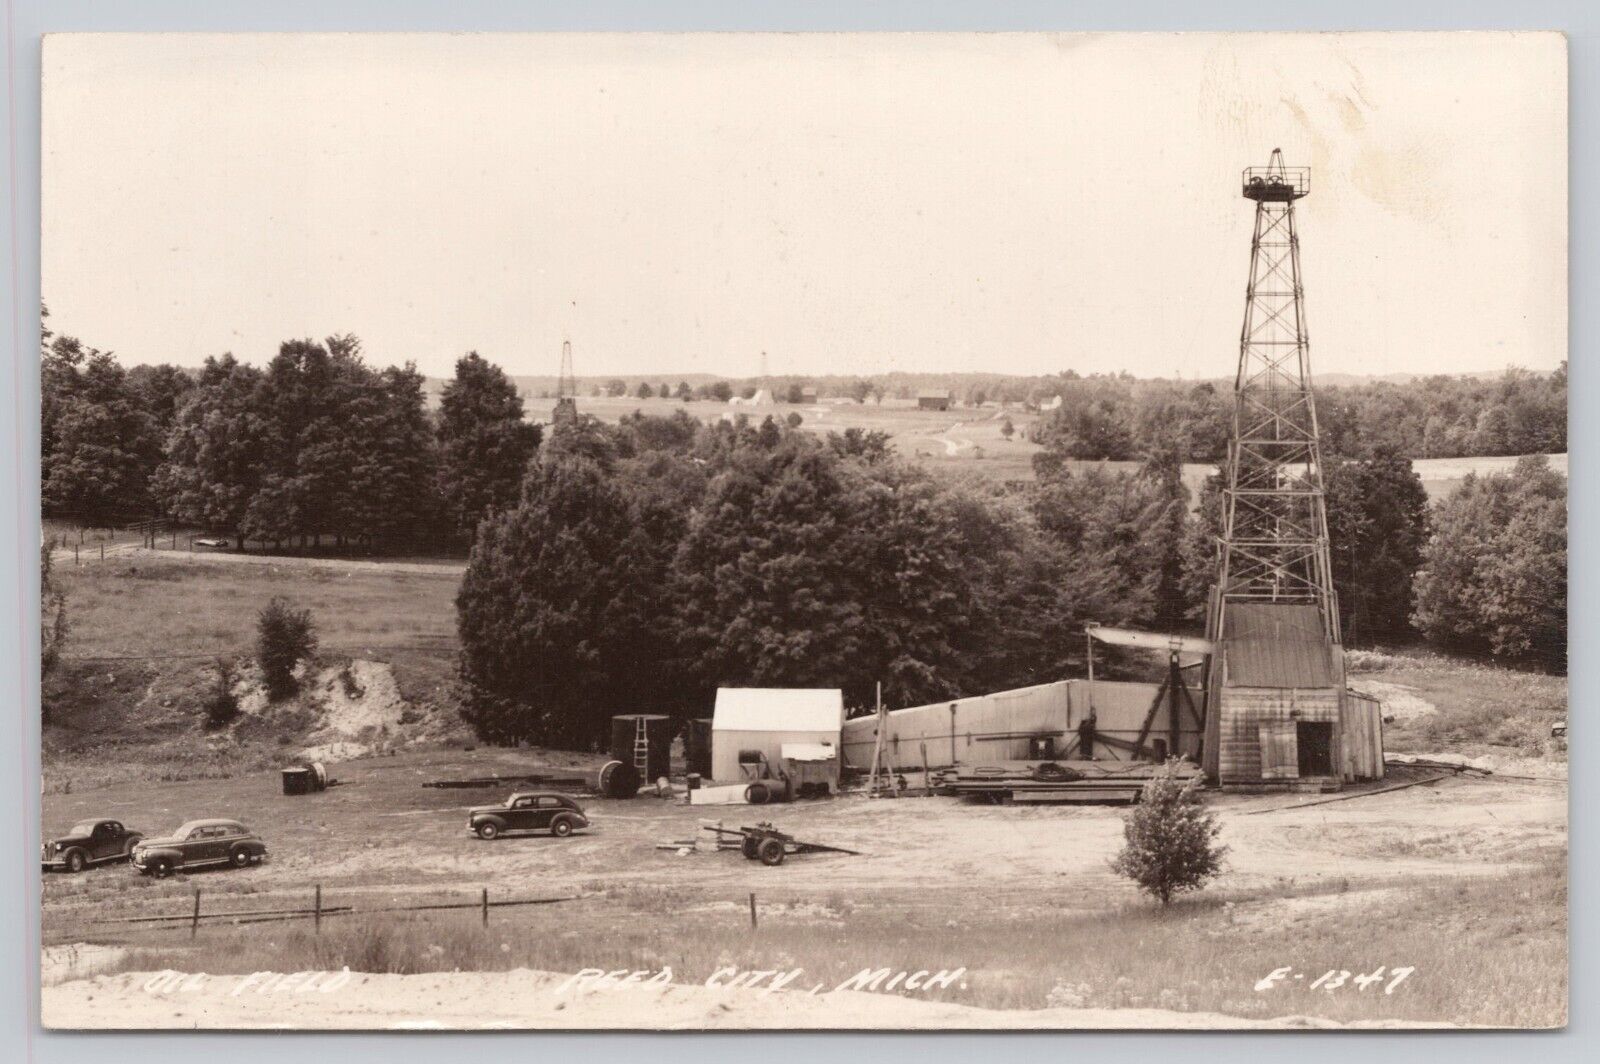 Reed City Michigan, Oil Field & Well, Old Cars, Vintage RPPC Real Photo Postcard